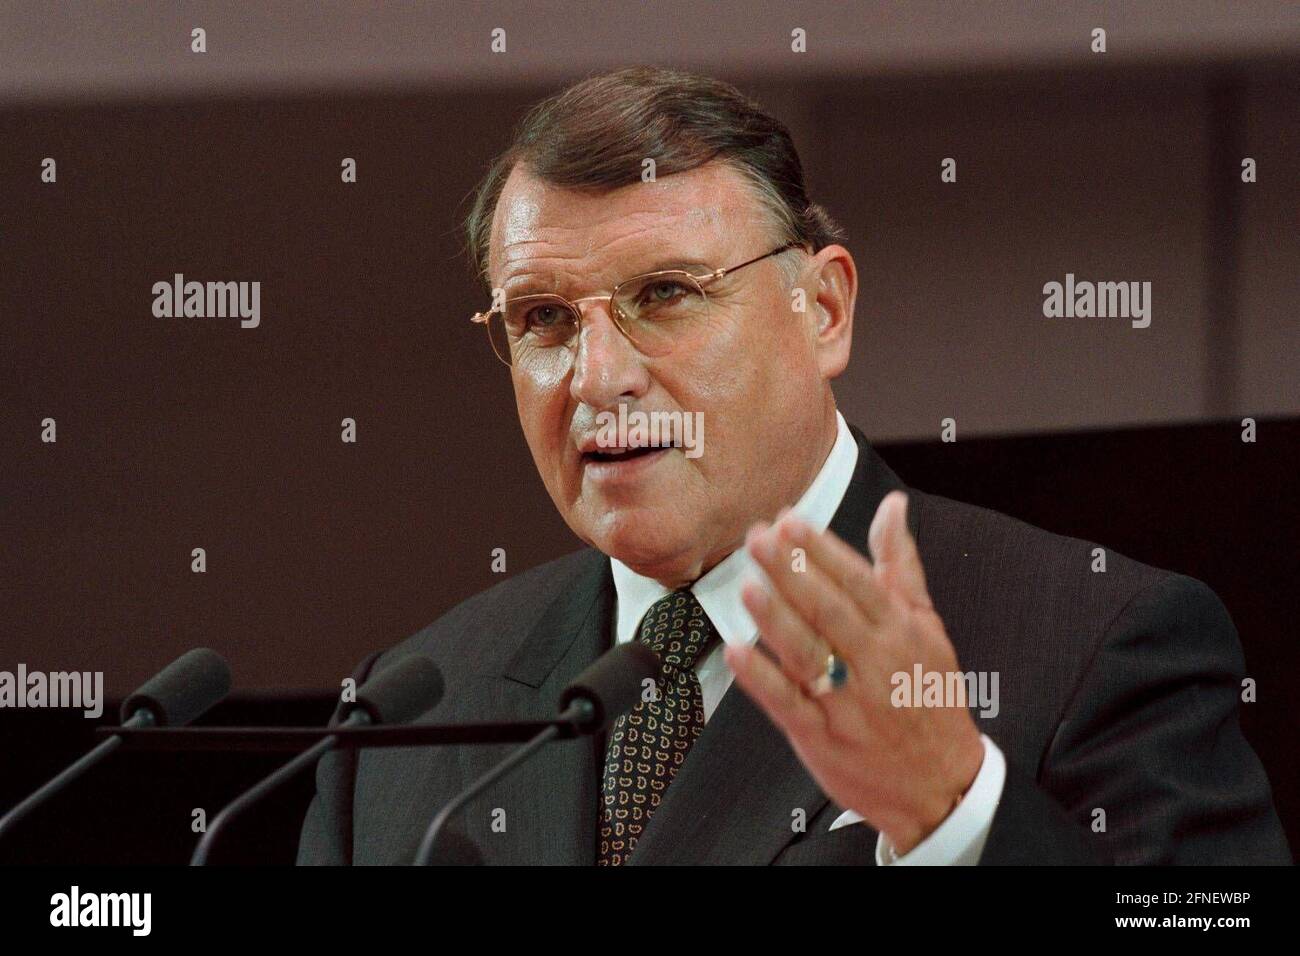 Dr. Klaus Mangold, Member of the Board of Management of DaimlerChrysler AG and Chairman of the Board of Management of DaimlerChrysler Services (debis) AG, during the 3rd debis Service Congress, in the House of Representatives in Berlin. IMAGE: 19990921-01/02-26 [automated translation] Stock Photo